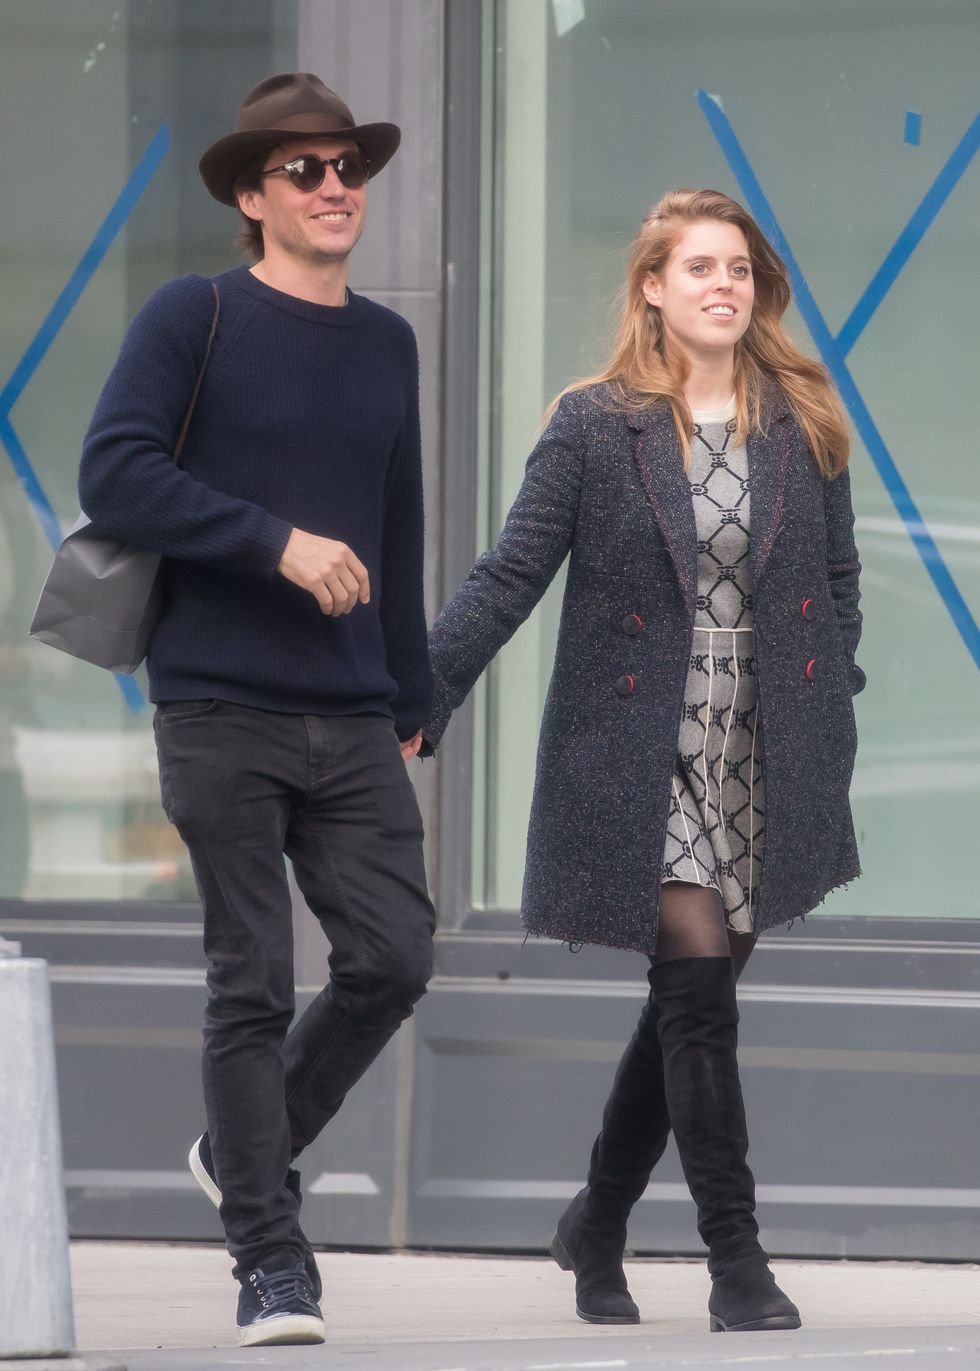 EXCLUSIVE: Princess Beatrice of York is All Smiles as She Steps Out with Boyfriend Edoardo Mapelli Mozzi on St. Patrick's Day in New York City.